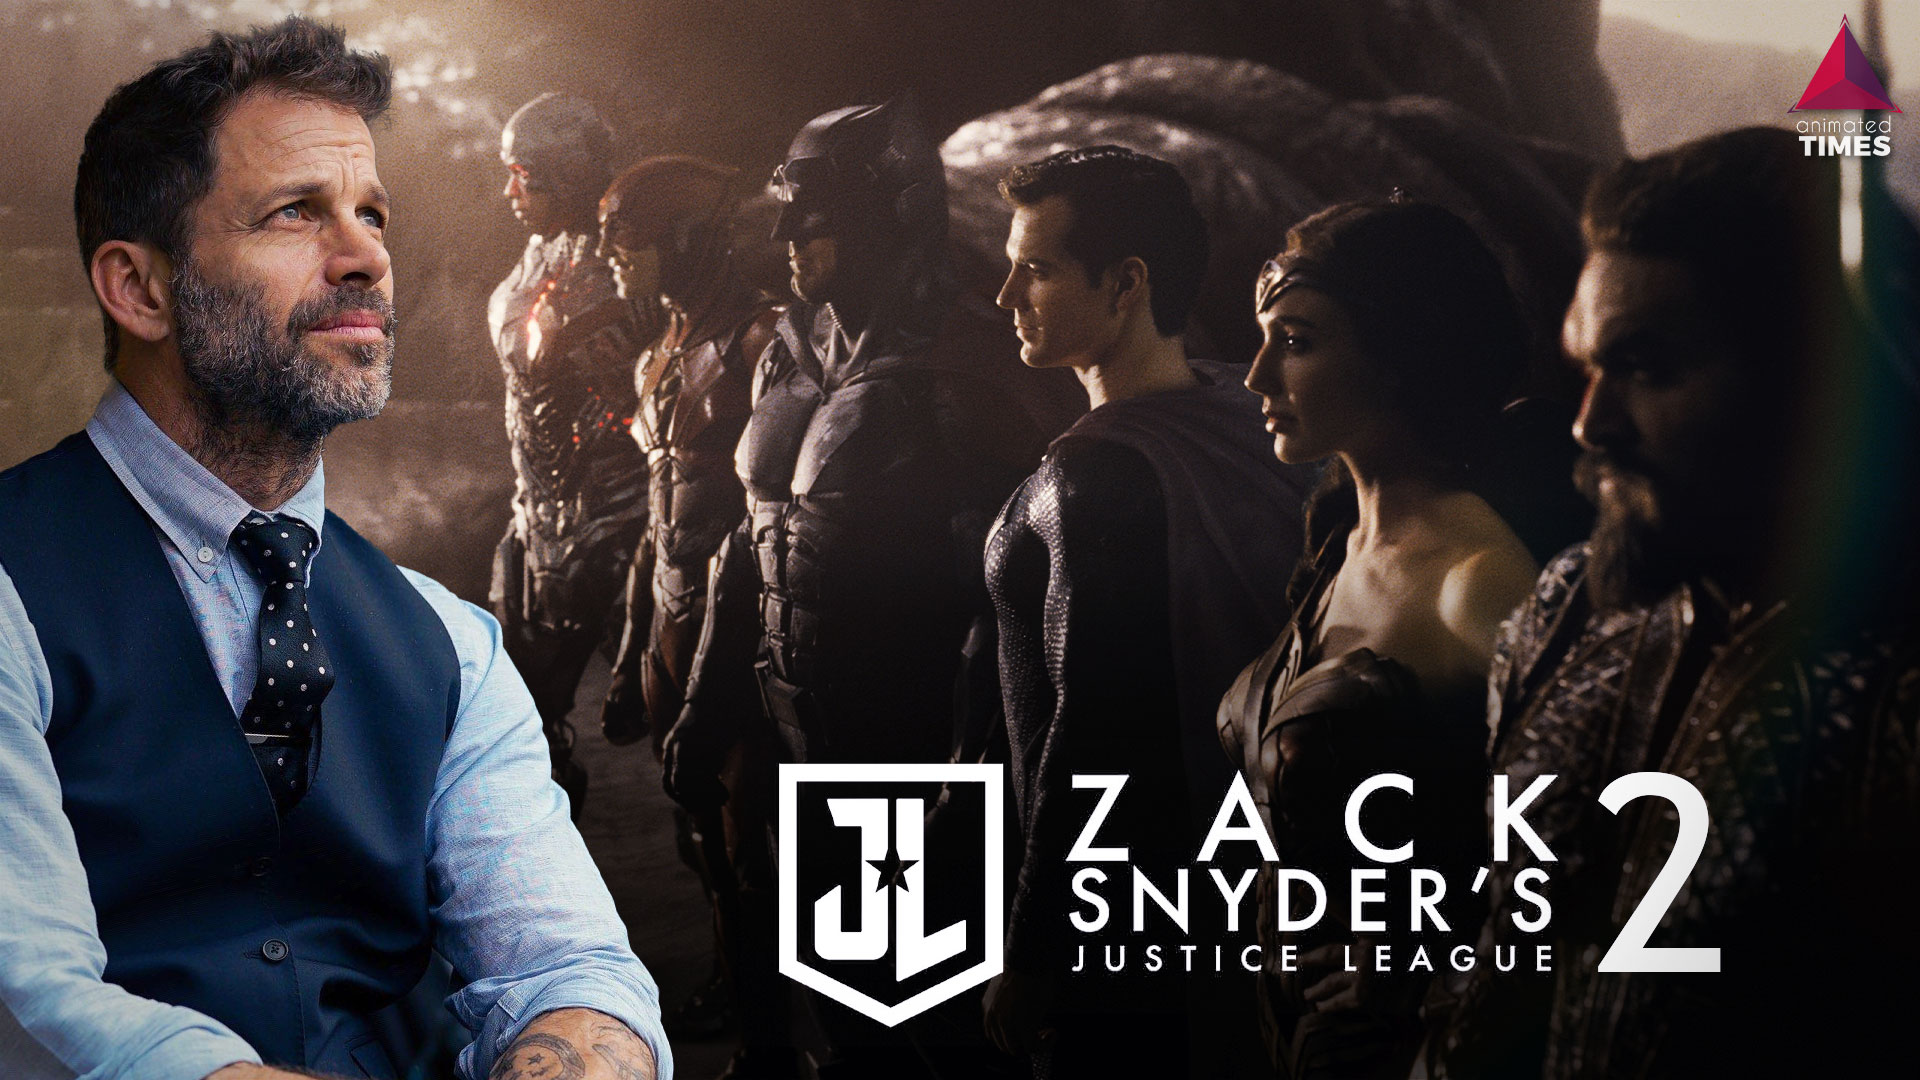 4 ‘Plans For Justice League 2’ and ‘3’ Have Been Revealed By Zack Snyder